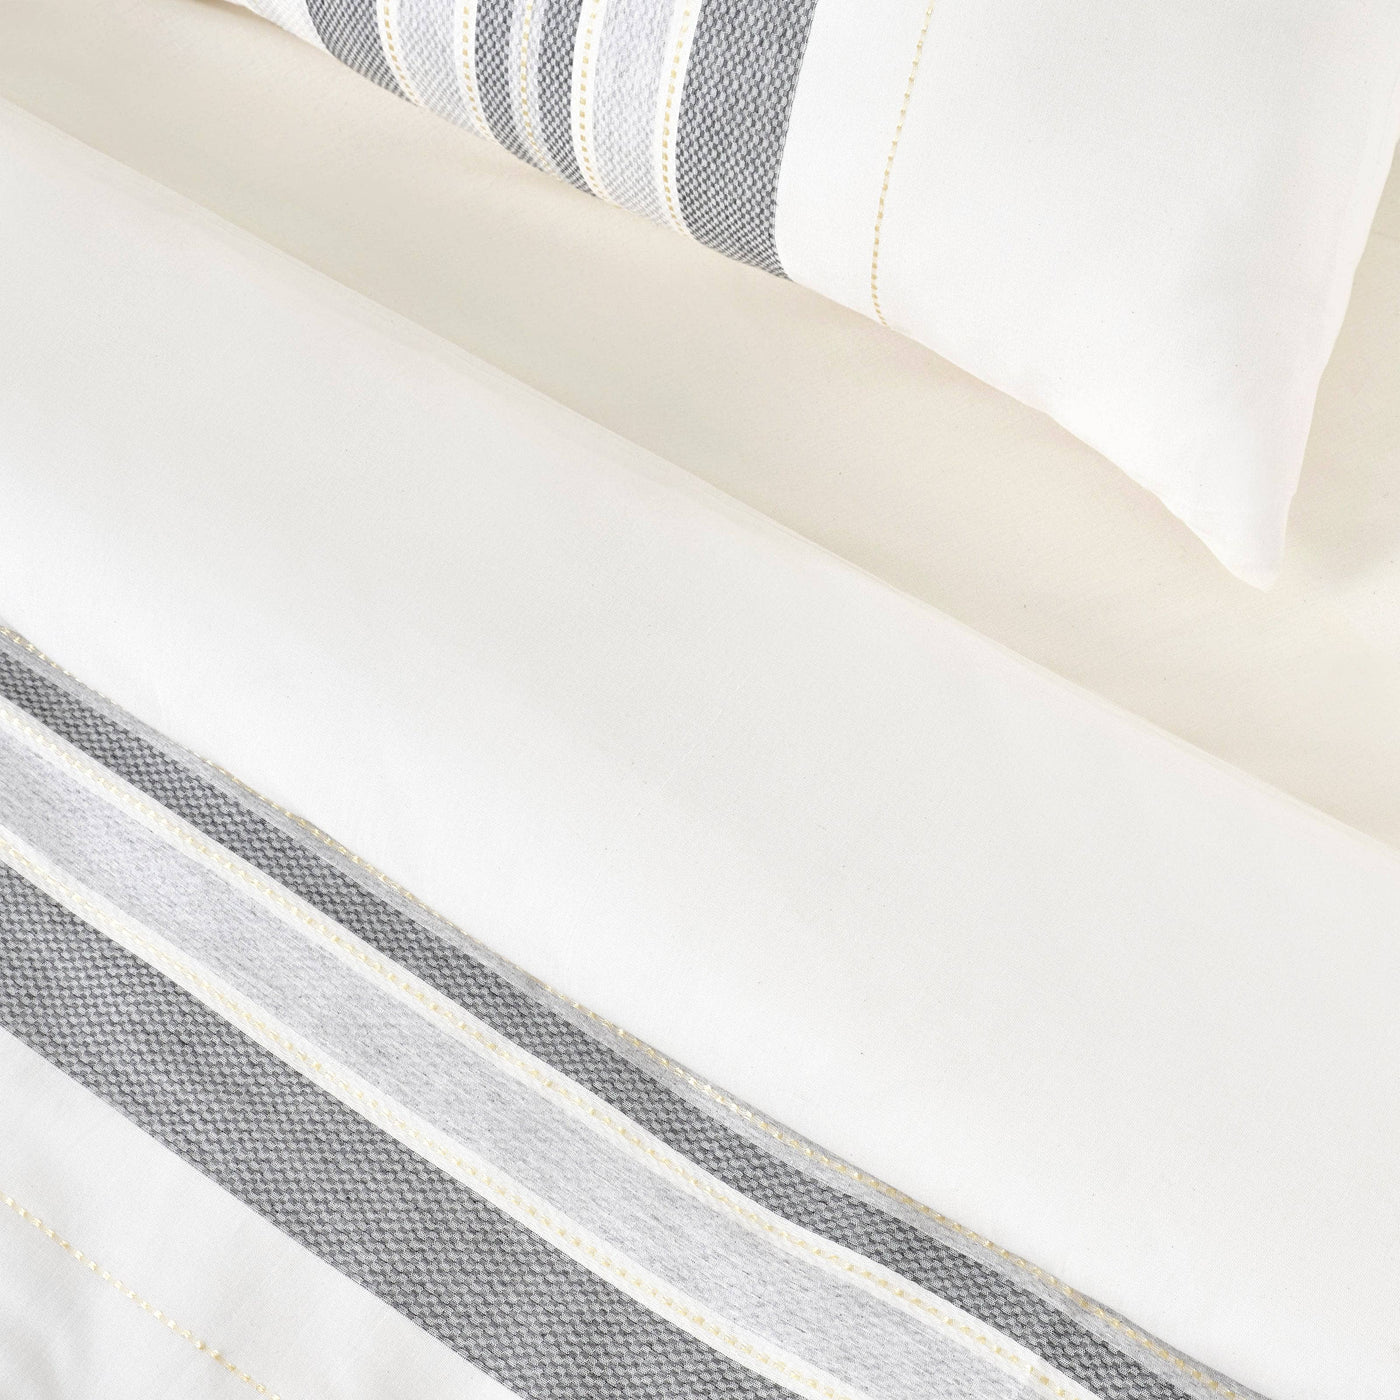 Cara Turkish Cotton Fitted Sheet, Off-White, Double Size Bed Sheets sazy.com